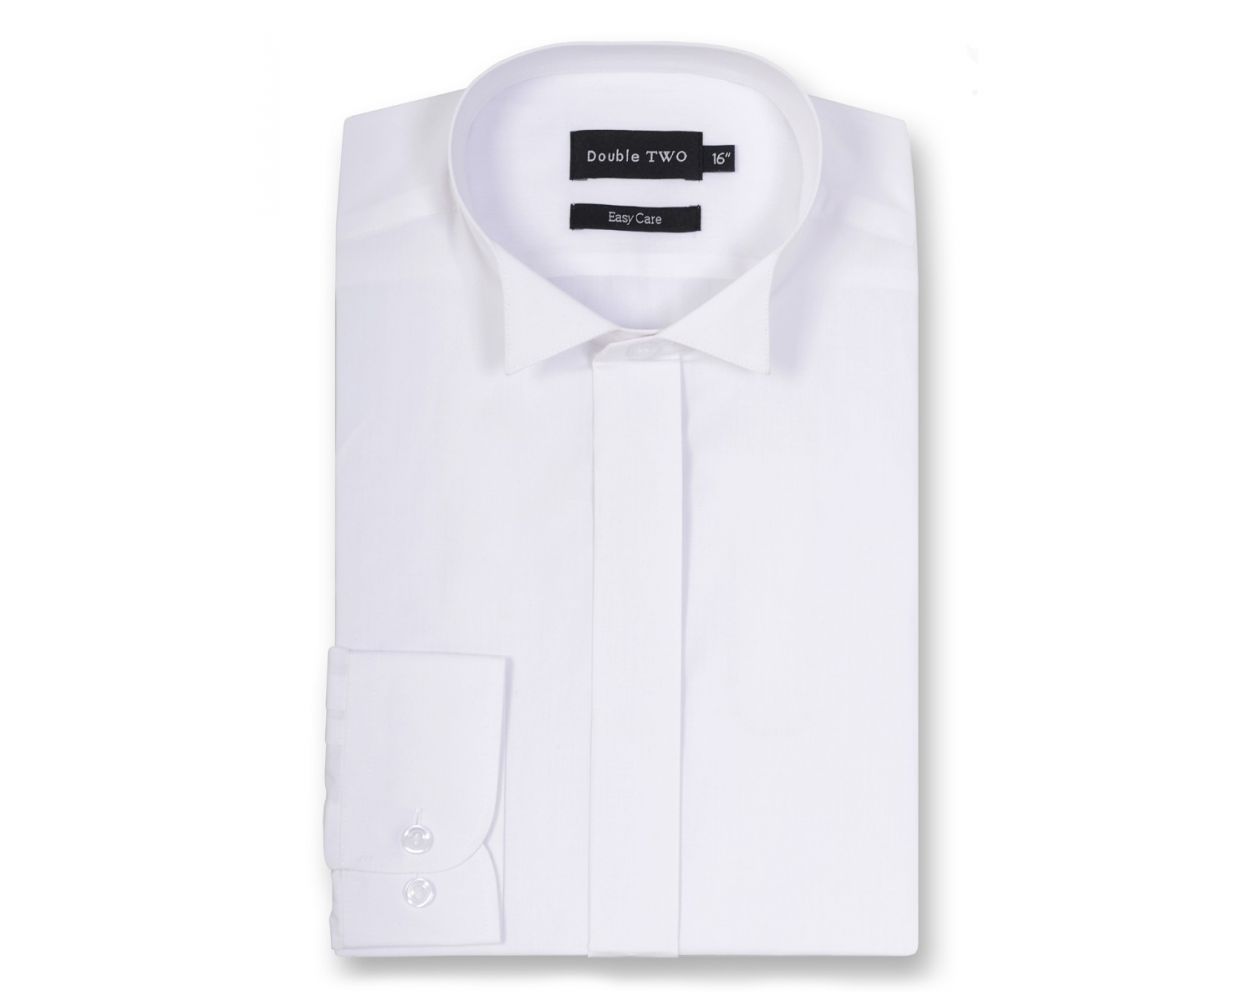 Brand new Men's White Wing Collar Shirts Double Two with fly front. 